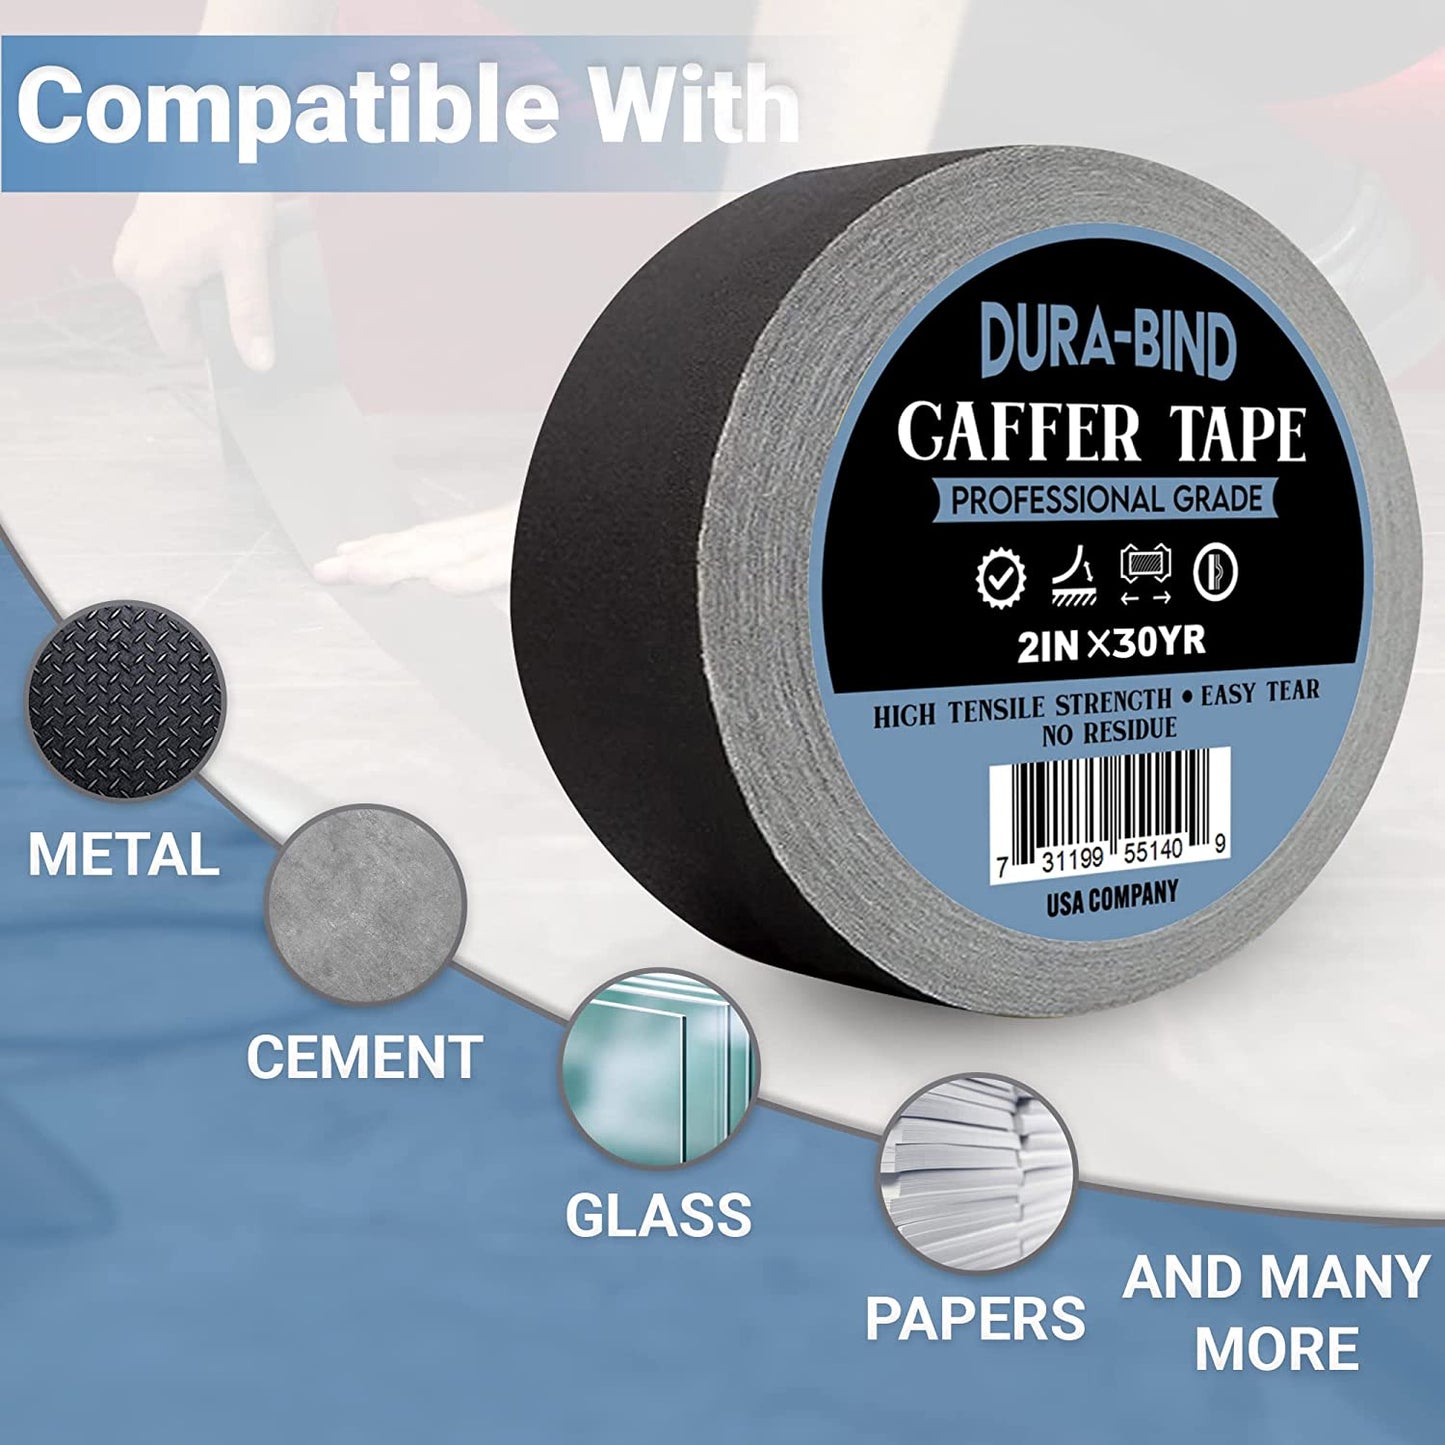 Dura-Bind Gaffer Tape, Premium Black 2 inches x 30 Yards, Matte Fabric Painters Cloth Tape, Safe for Floor Wall, Leaves No Residue, Pro Blackout Non-Reflective protapes for Electrical Cords Cable